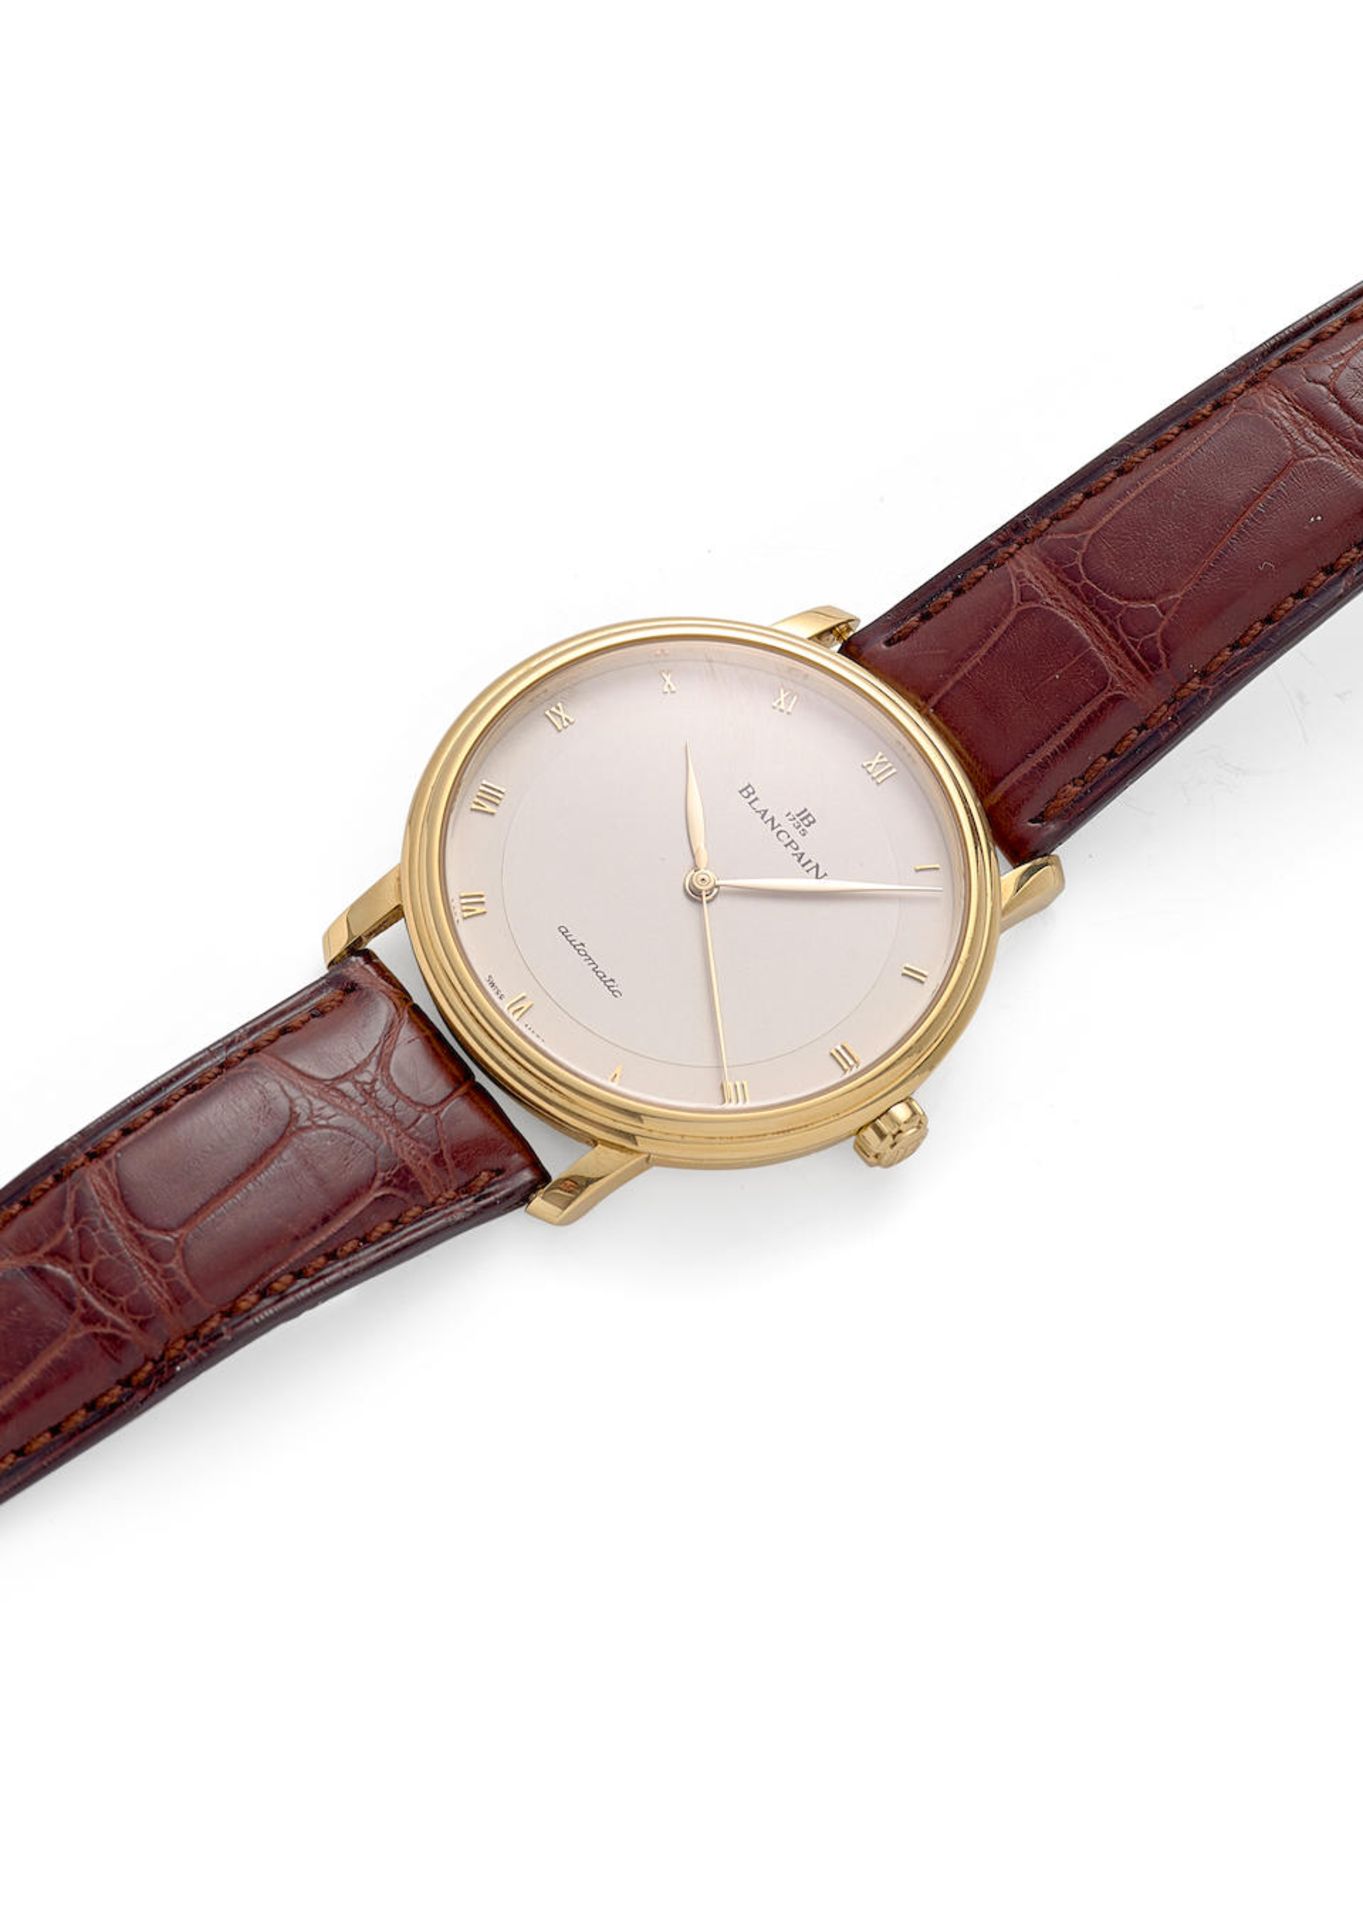 BLANCPAIN. AN 18K GOLD AUTOMATIC WRISTWATCH Villeret, Ref: 6222 1442 55, c. 2000s - Image 4 of 6